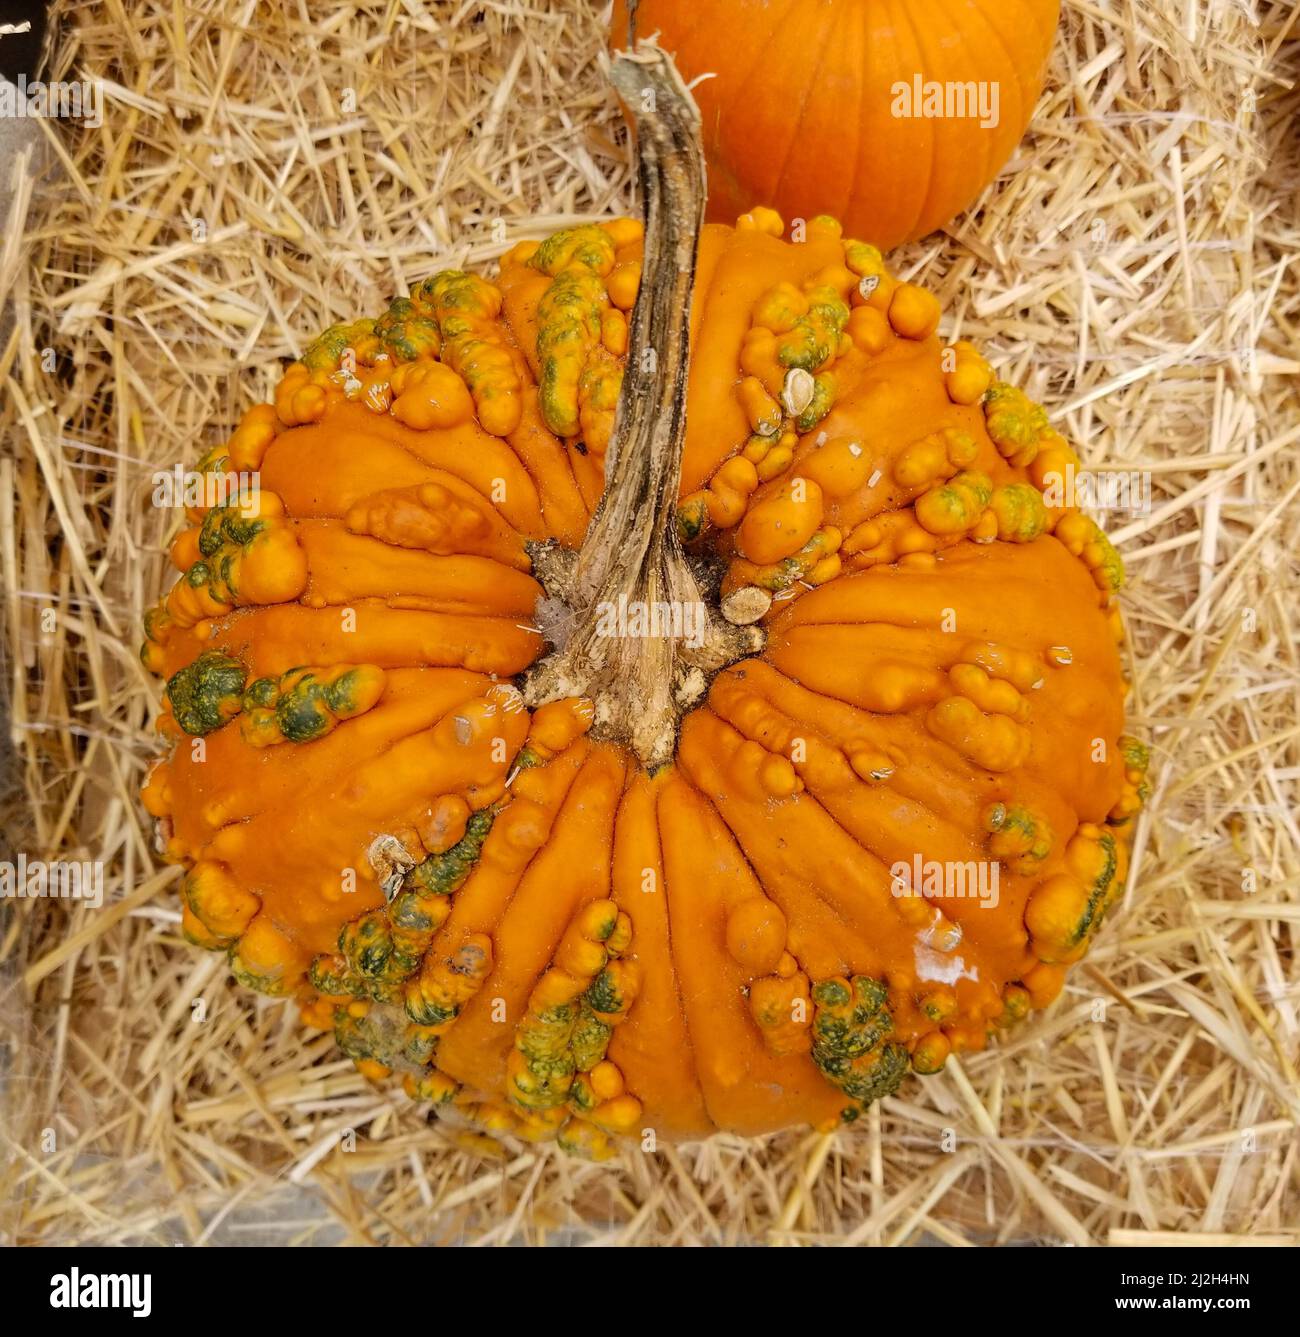 The view of a top of a fresh round pumpkin Stock Photo